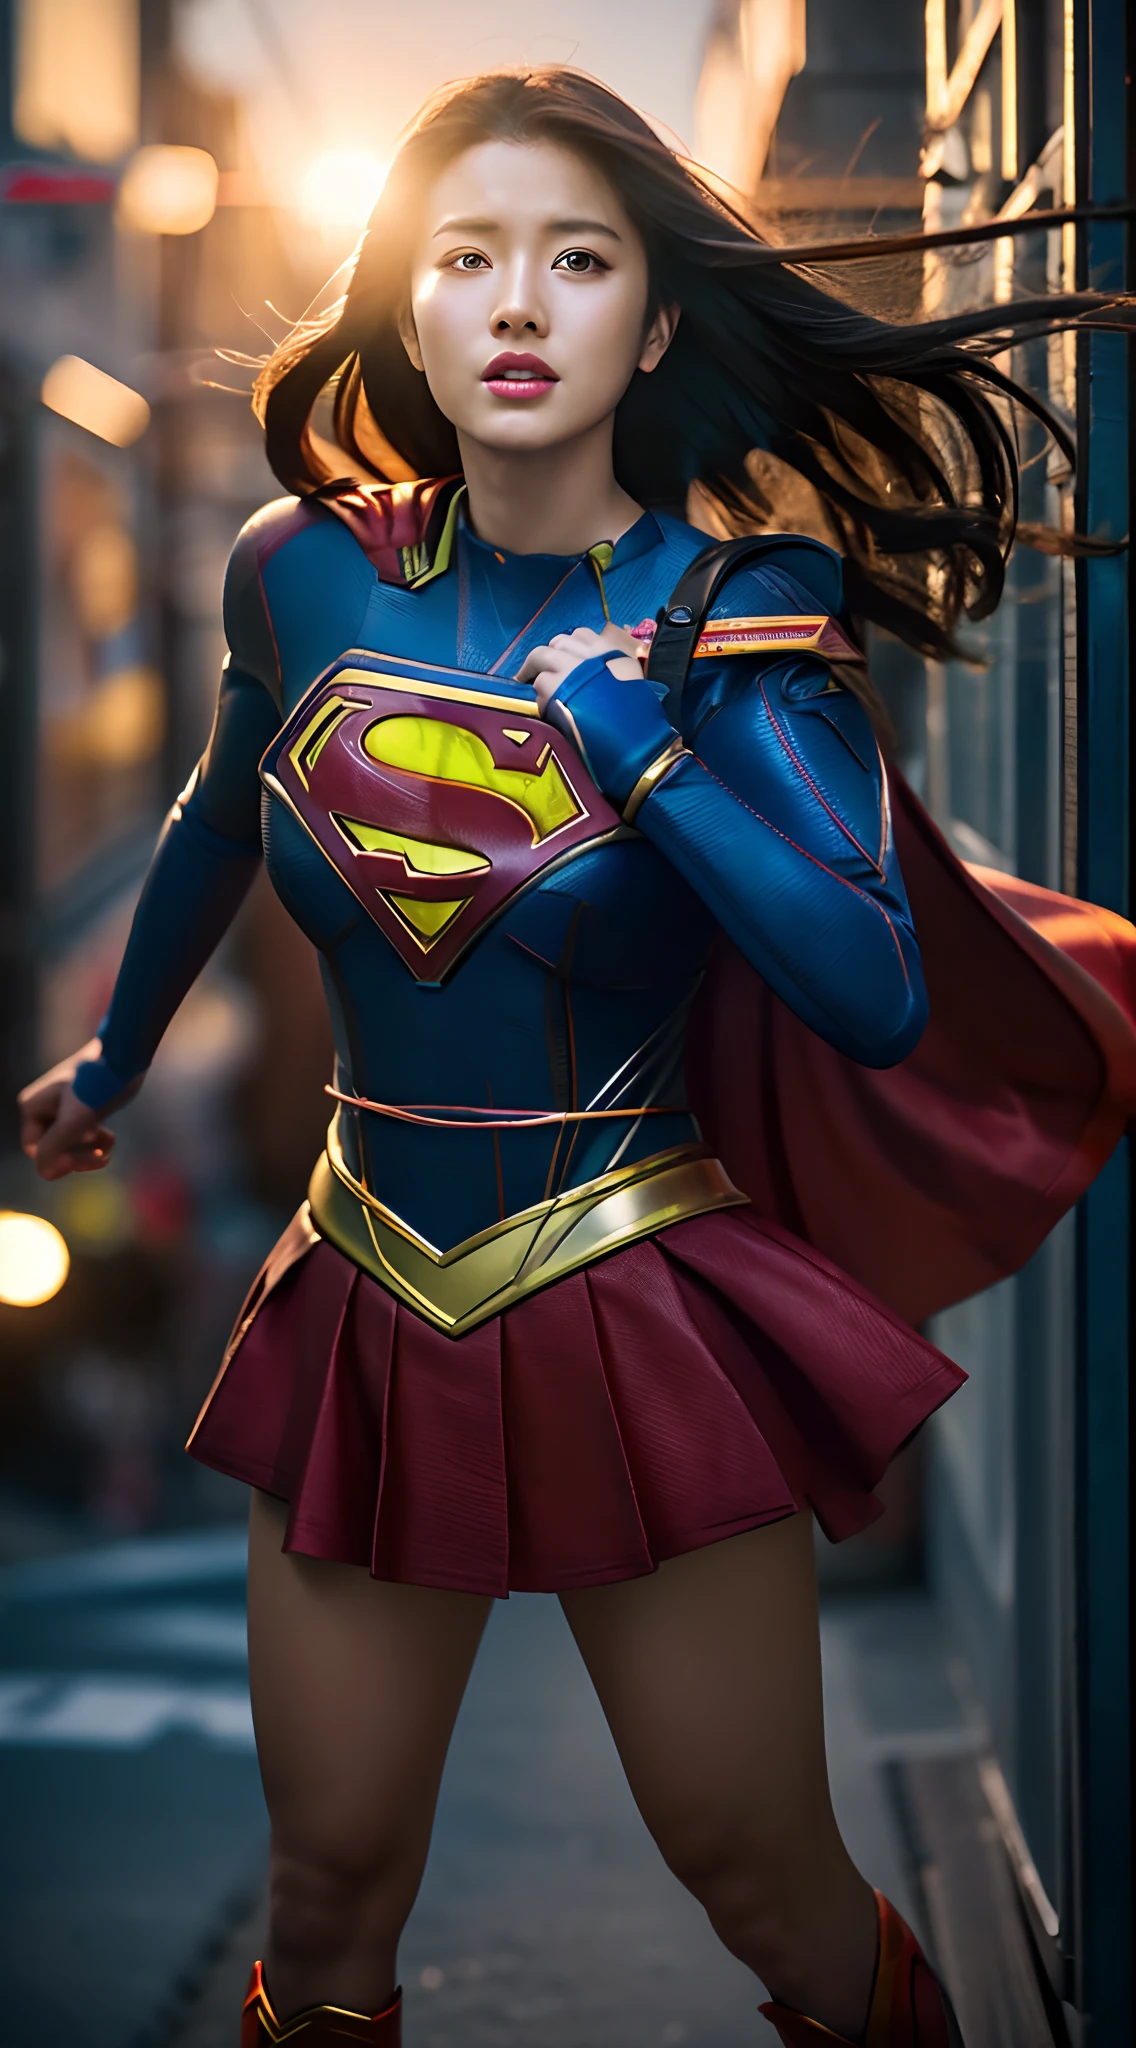 A woman dressed as a supergirl poses for a photo - SeaArt AI